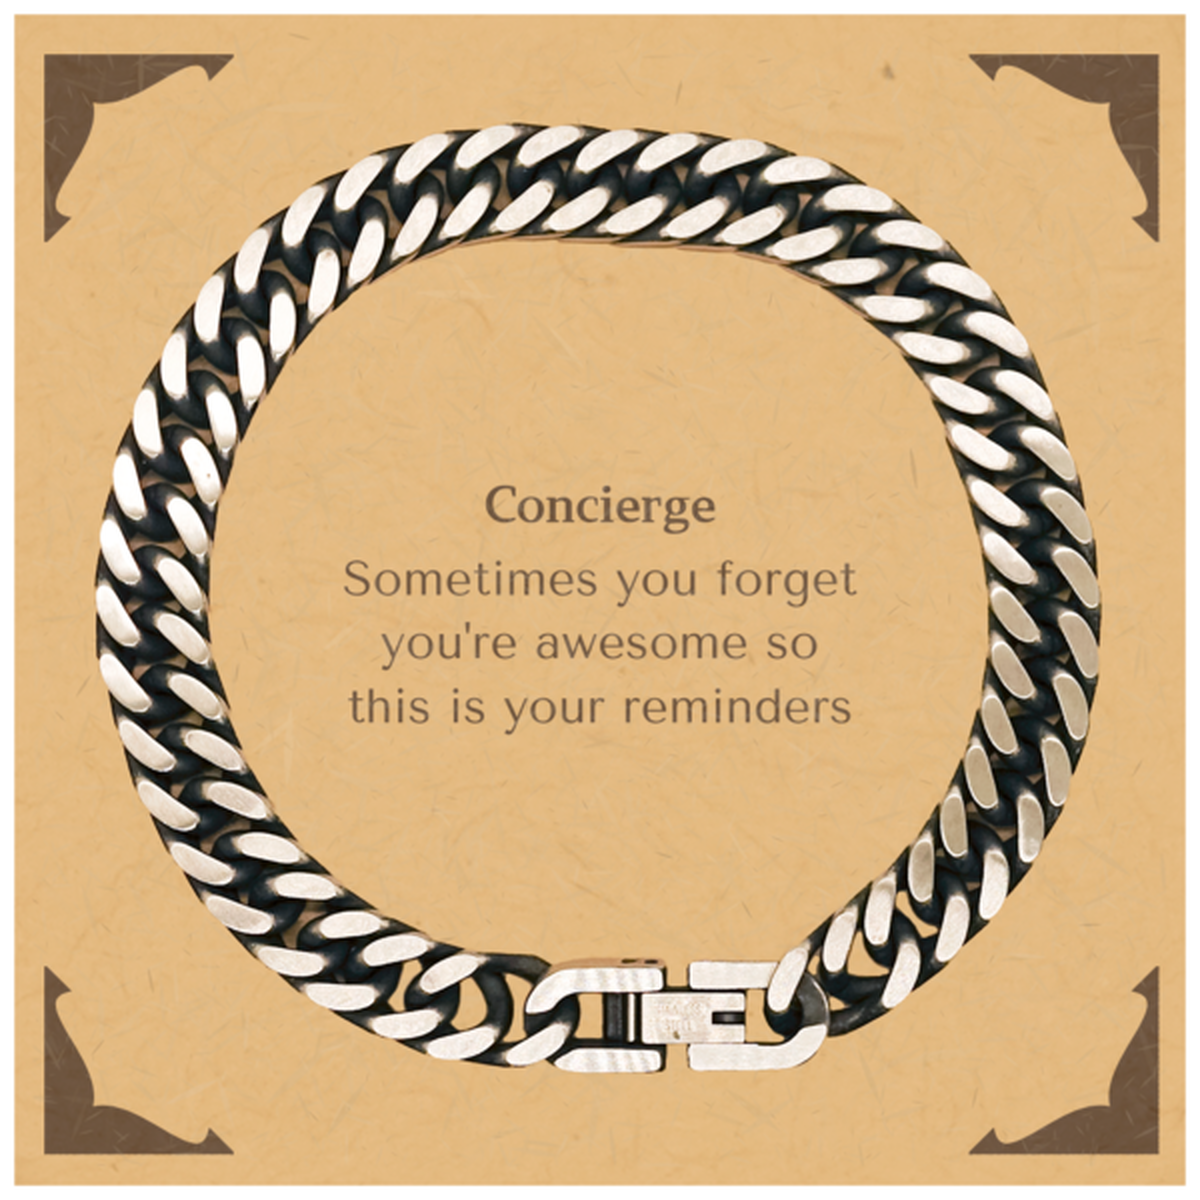 Sentimental Concierge Cuban Link Chain Bracelet, Concierge Sometimes you forget you're awesome so this is your reminders, Graduation Christmas Birthday Gifts for Concierge, Men, Women, Coworkers